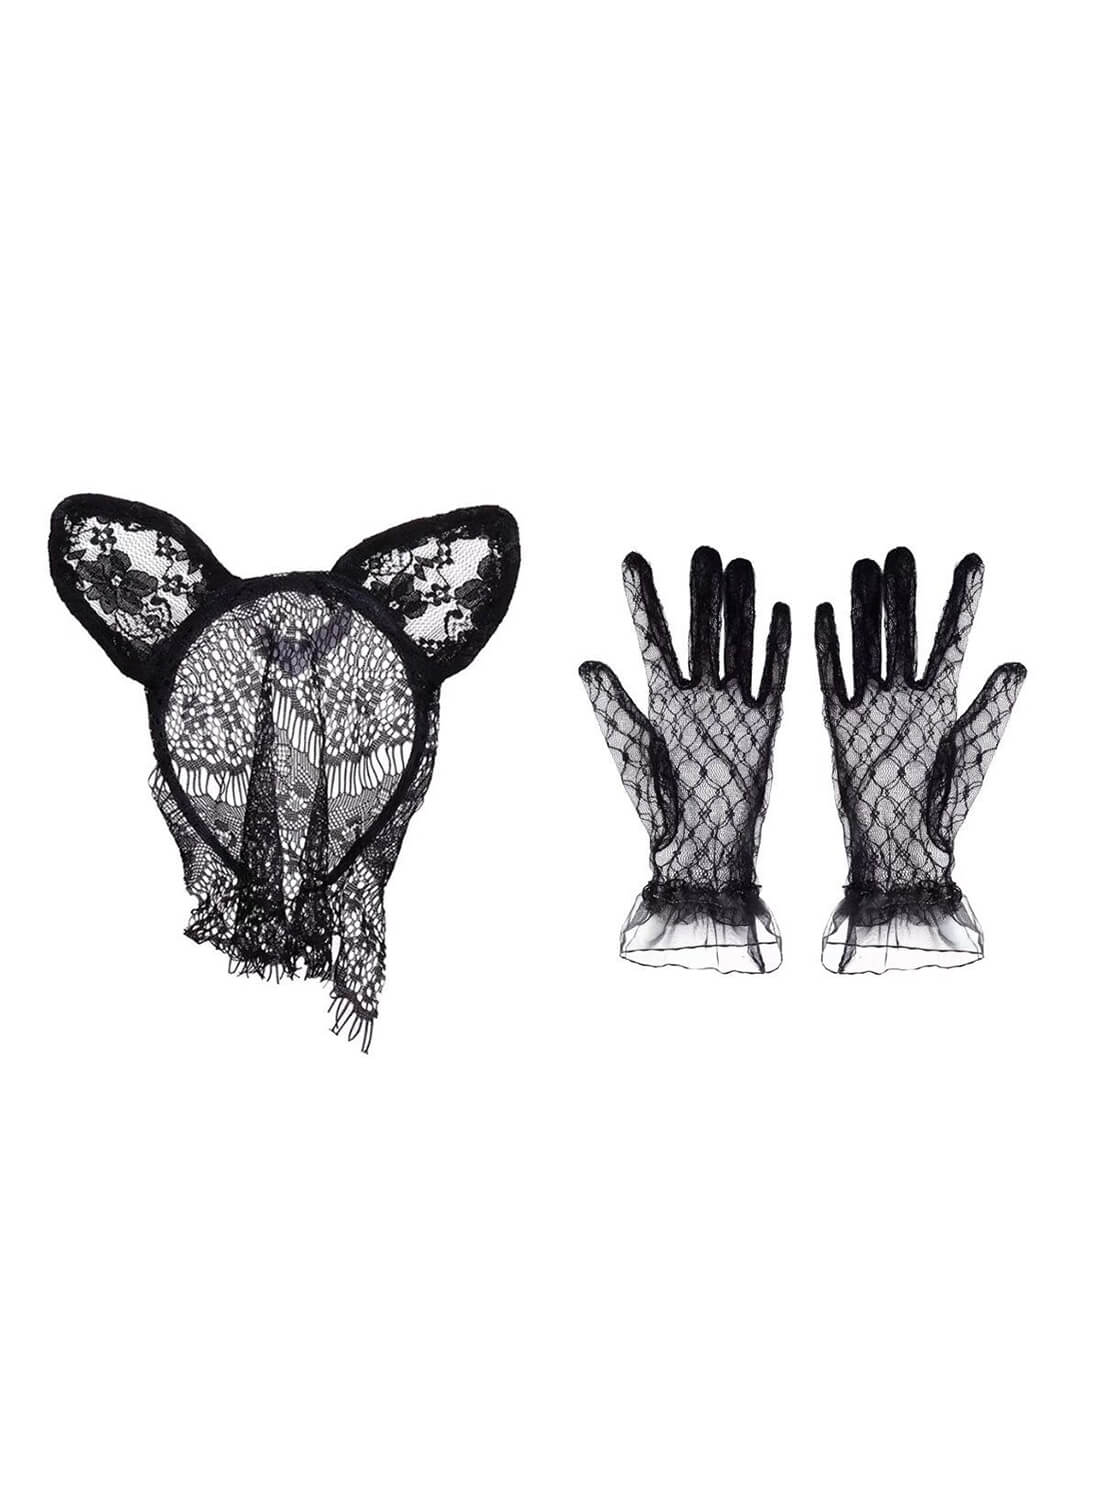 Women Cat Ears Headband with Lace Veil and Lace Gloves for Women